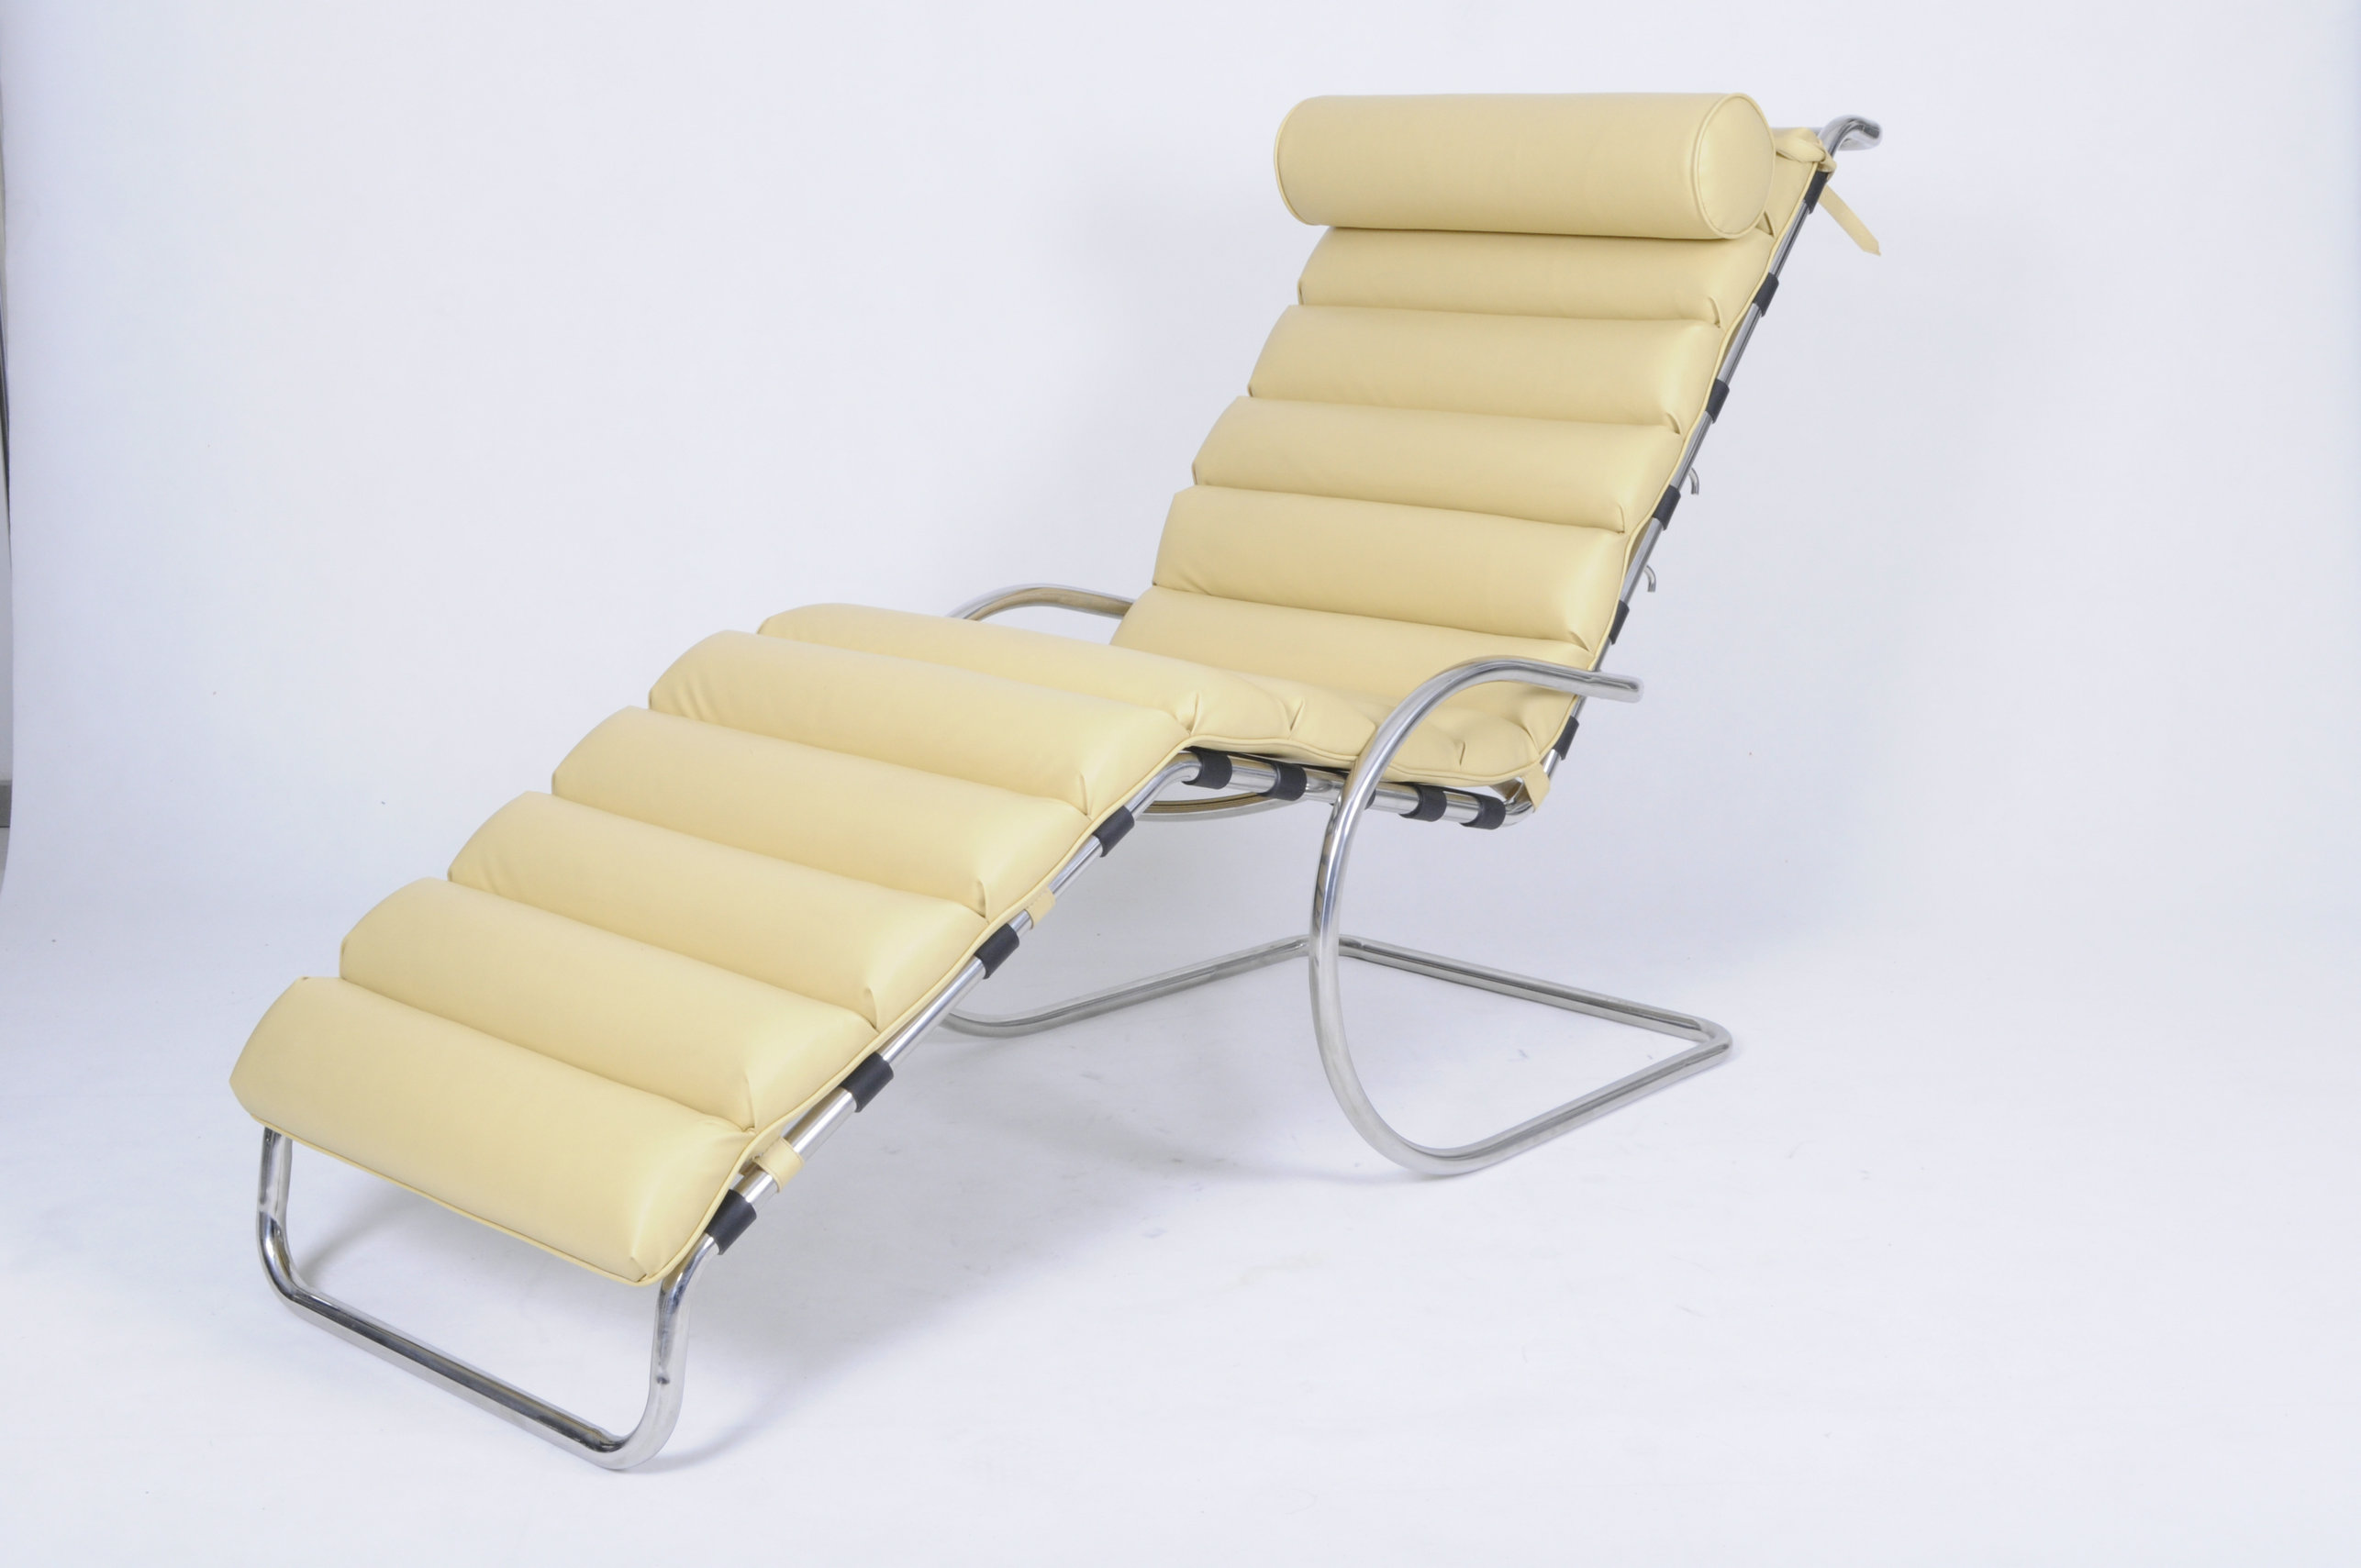 MR Adjustable chaise lounge chair